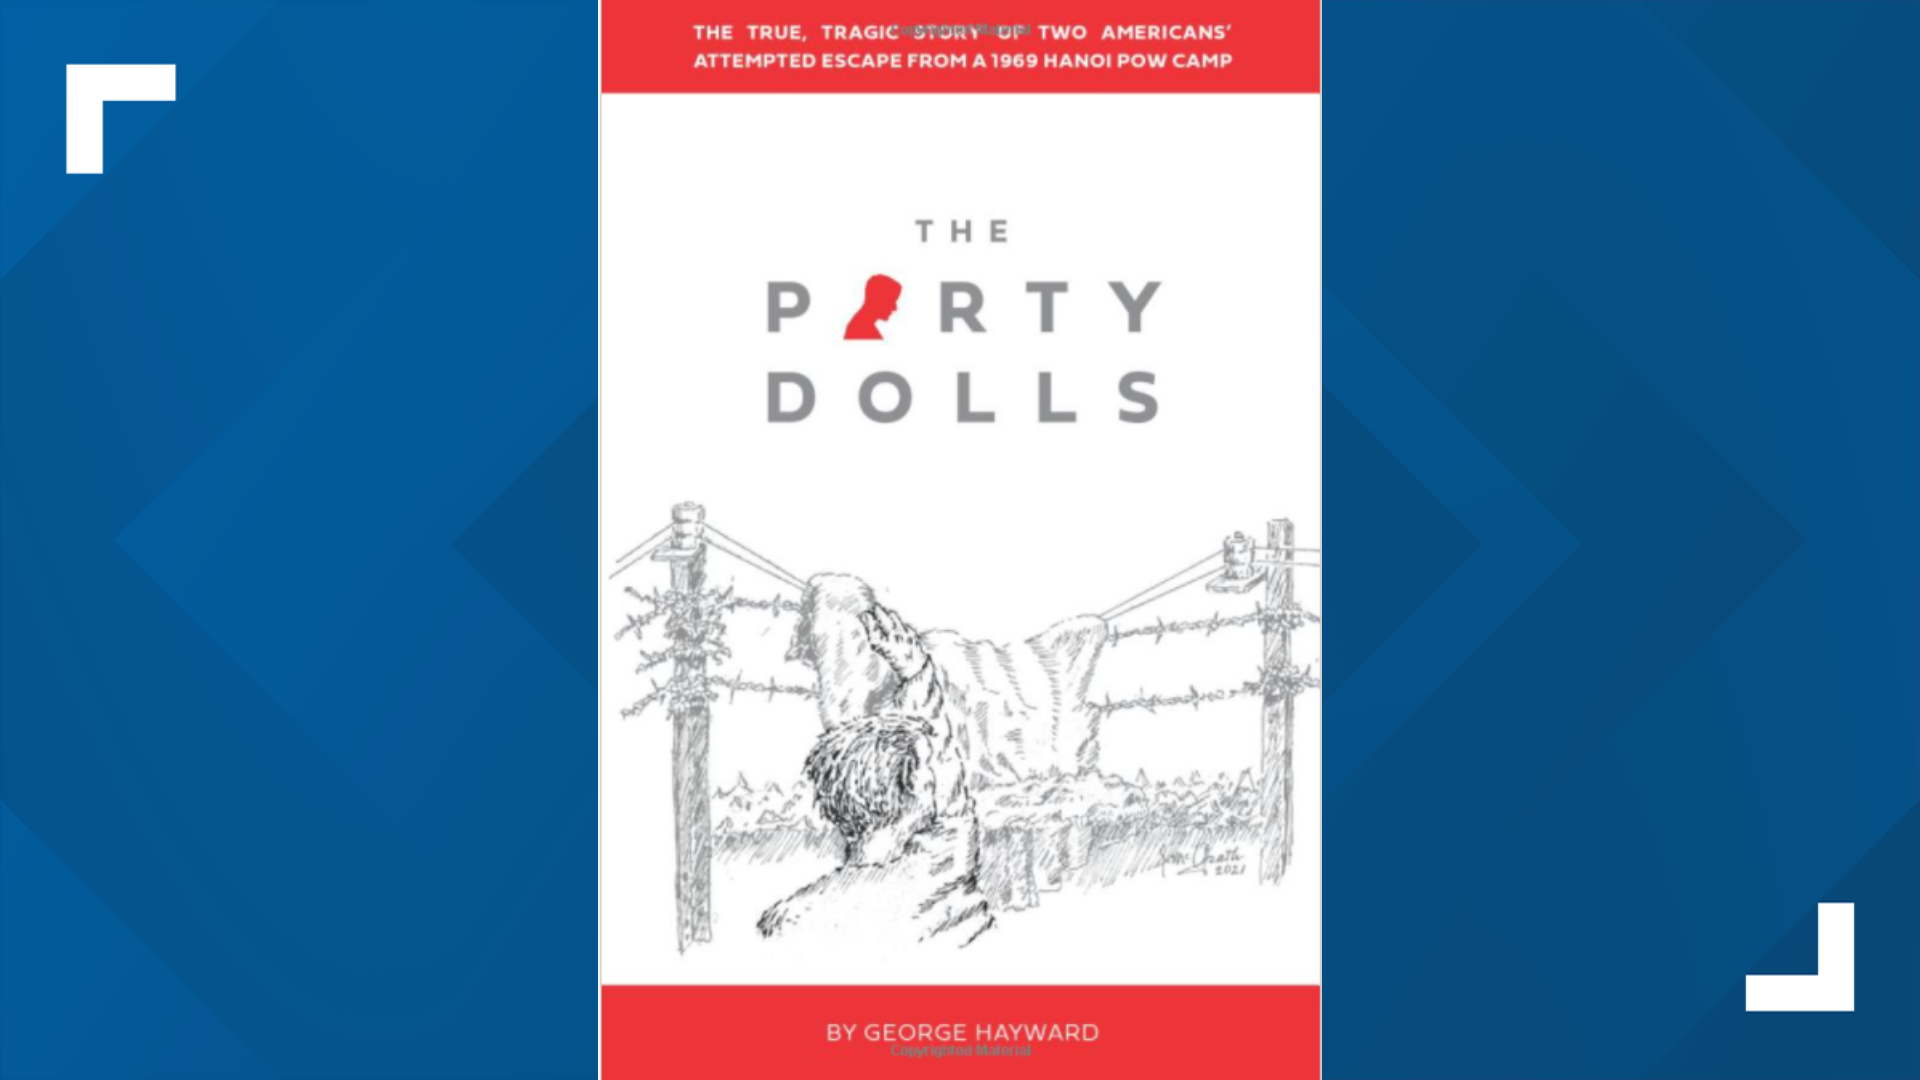 George Hayward's book 'The Party Dolls' also has the story of a local man, Lt. Col. Alton Meyer, his role in the plot to escape and torture after it failed.